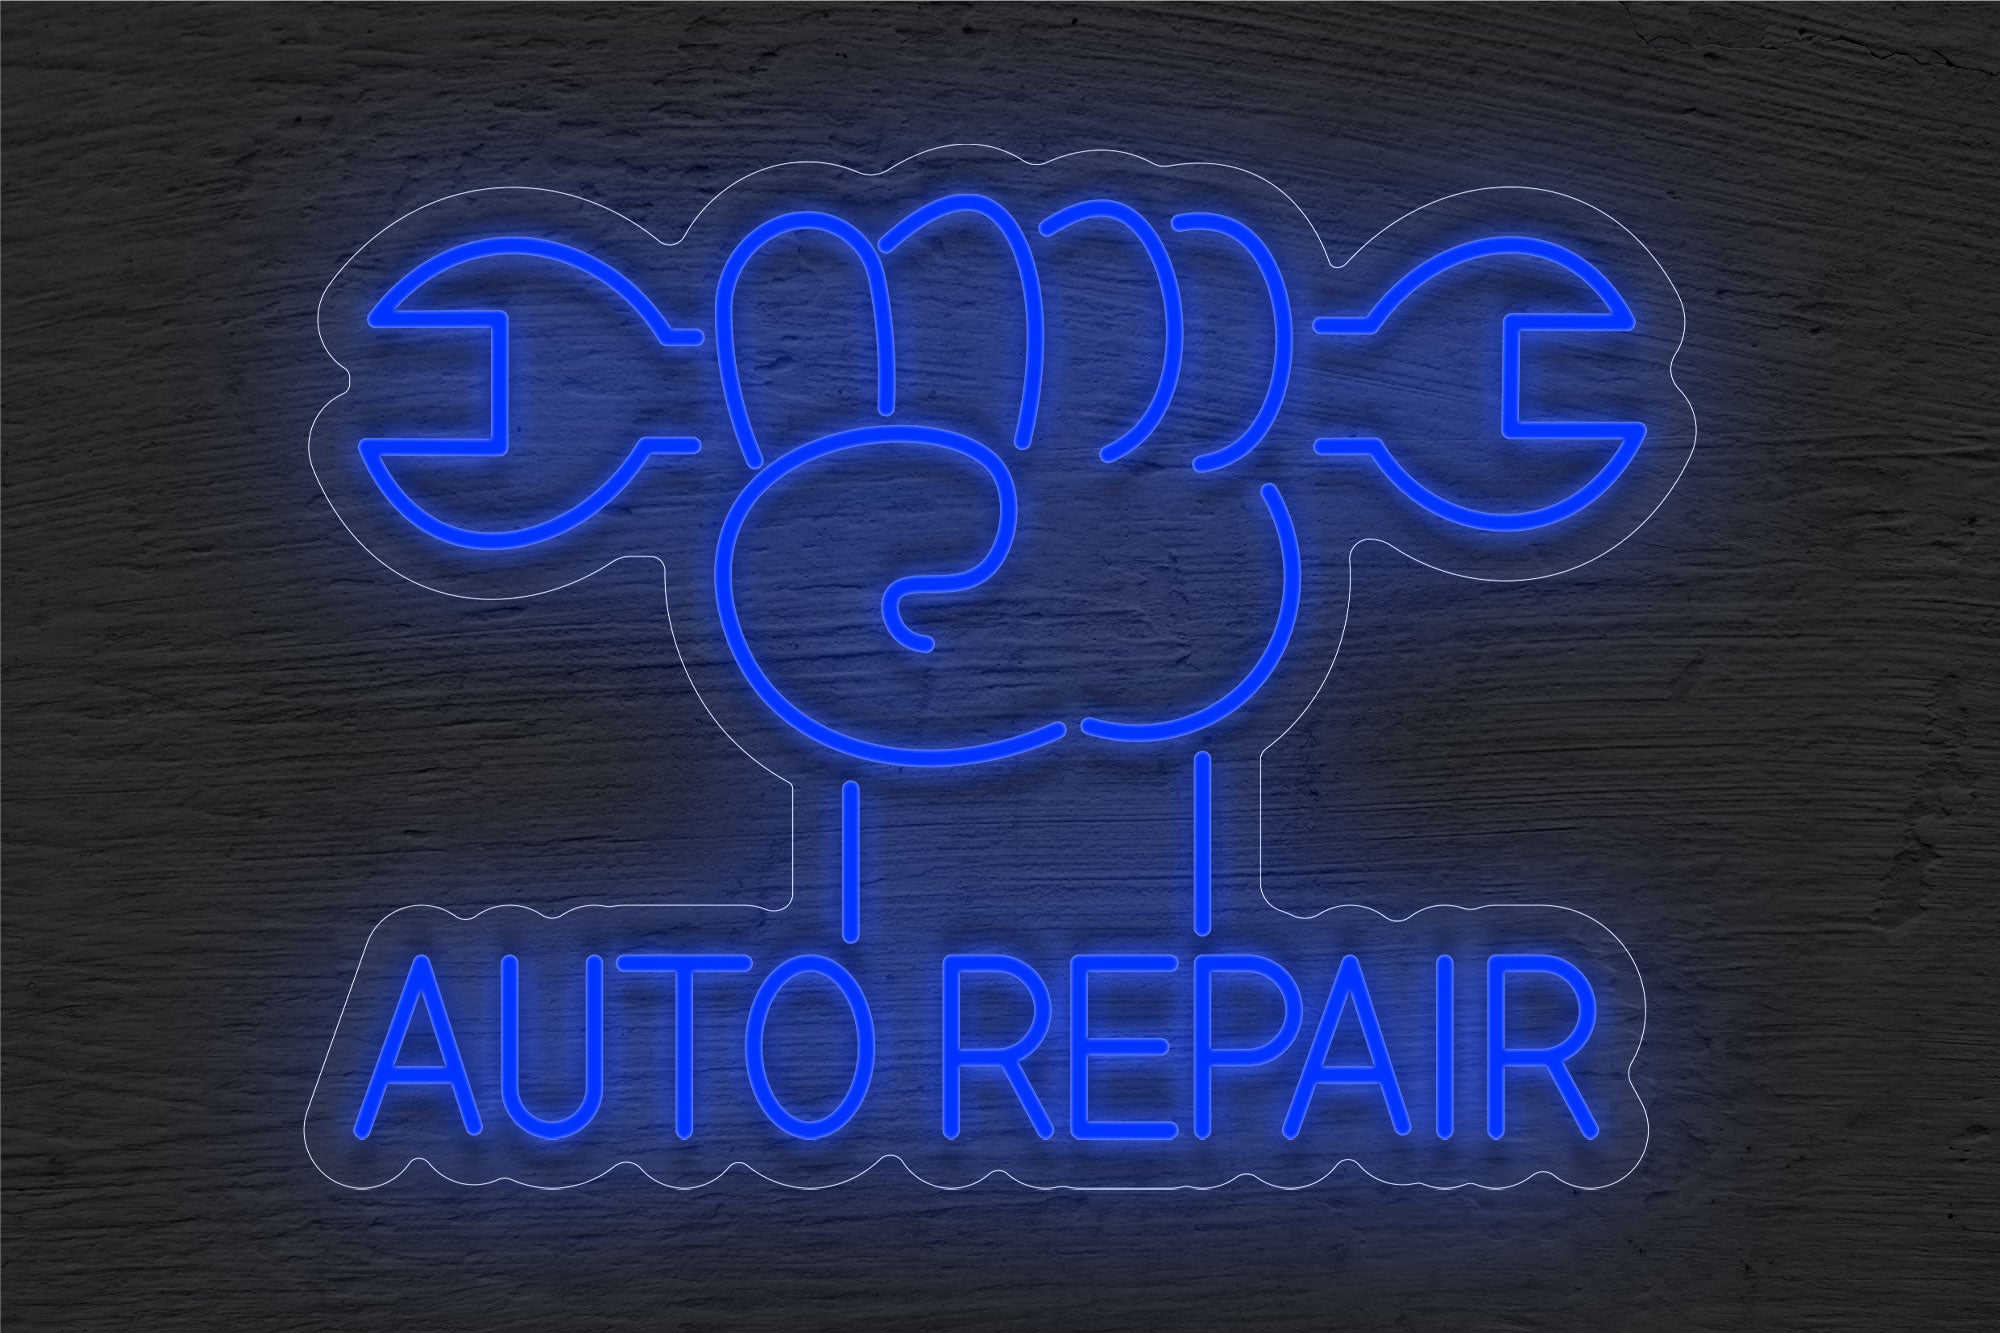 "Auto Repair" with Arm  and Tools LED Neon Sign